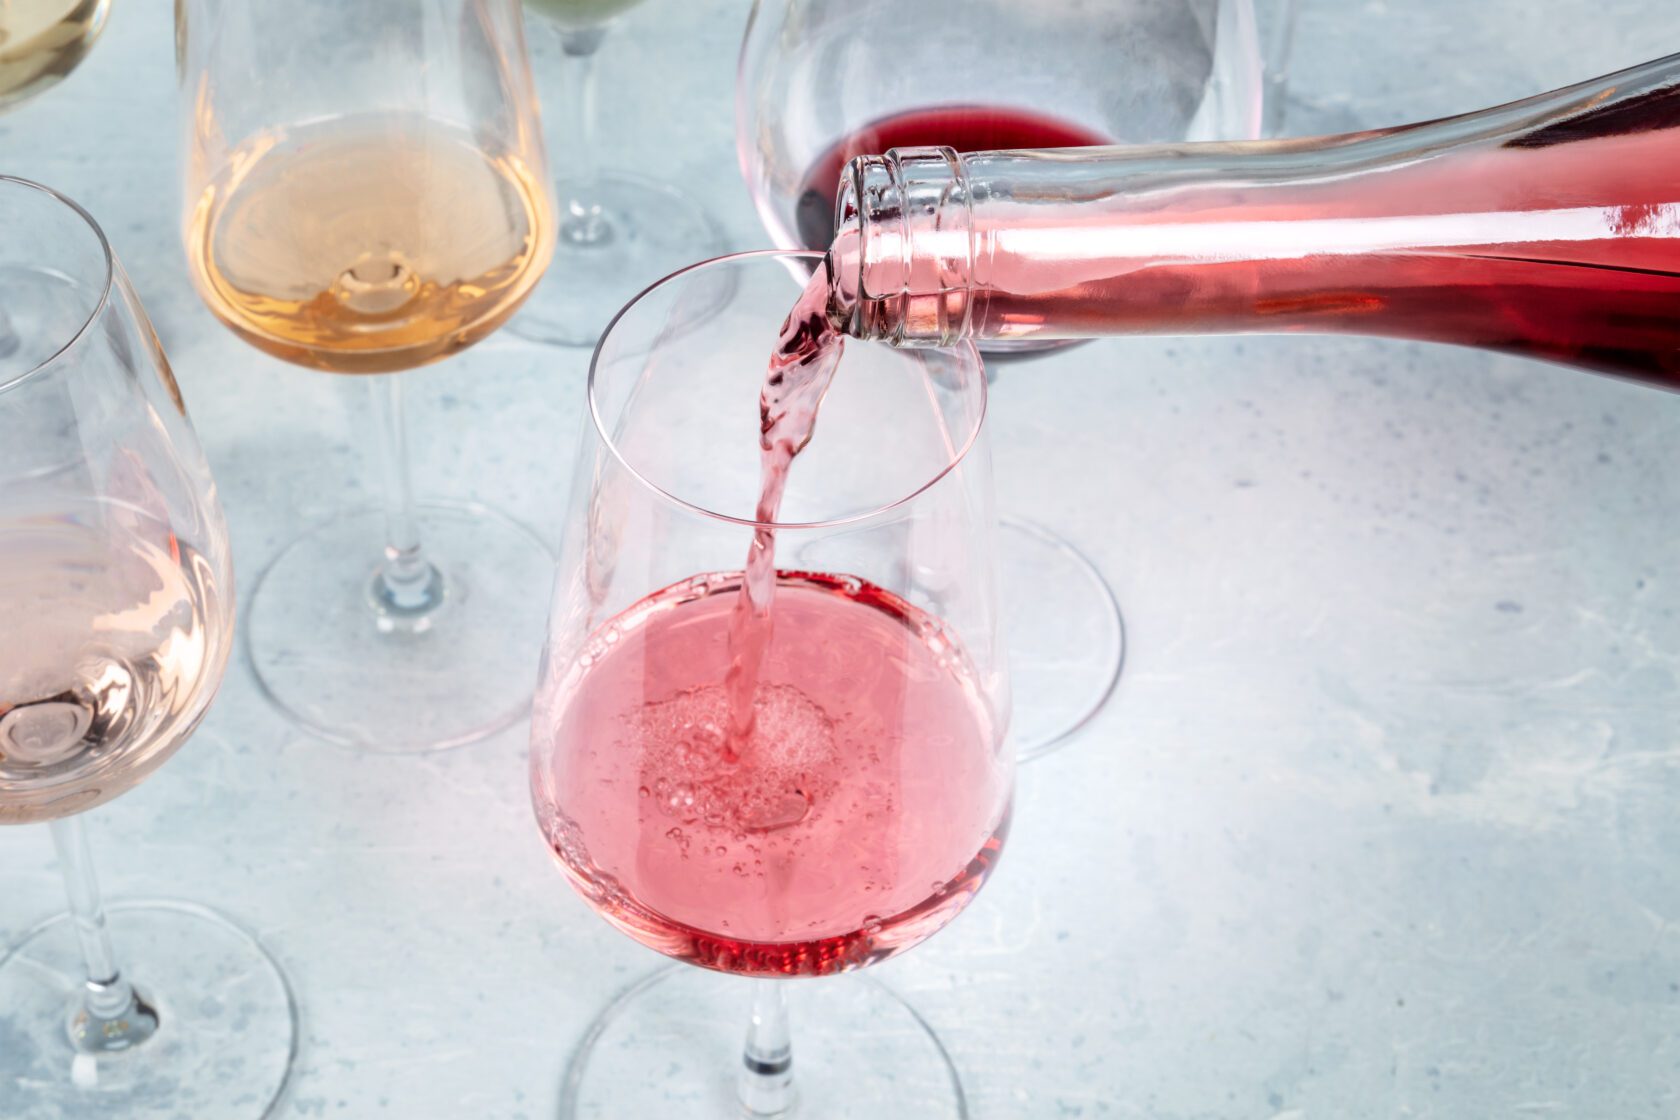 Rose wine poured into a glass at a tasting at a winery, with copy space. Winetasting event